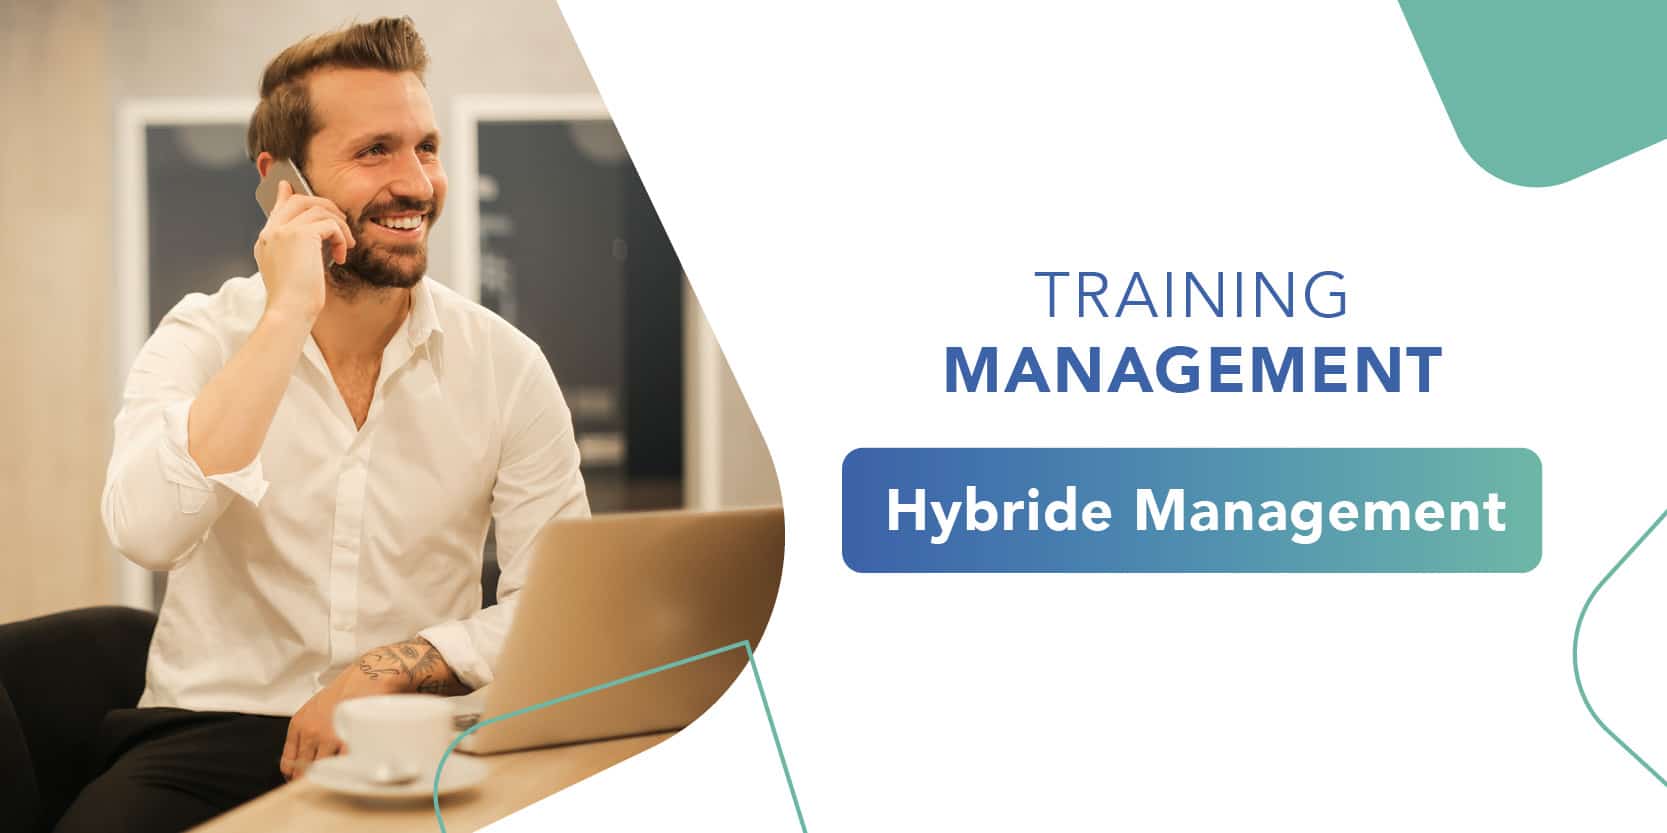 Our Hybrid Management trainings